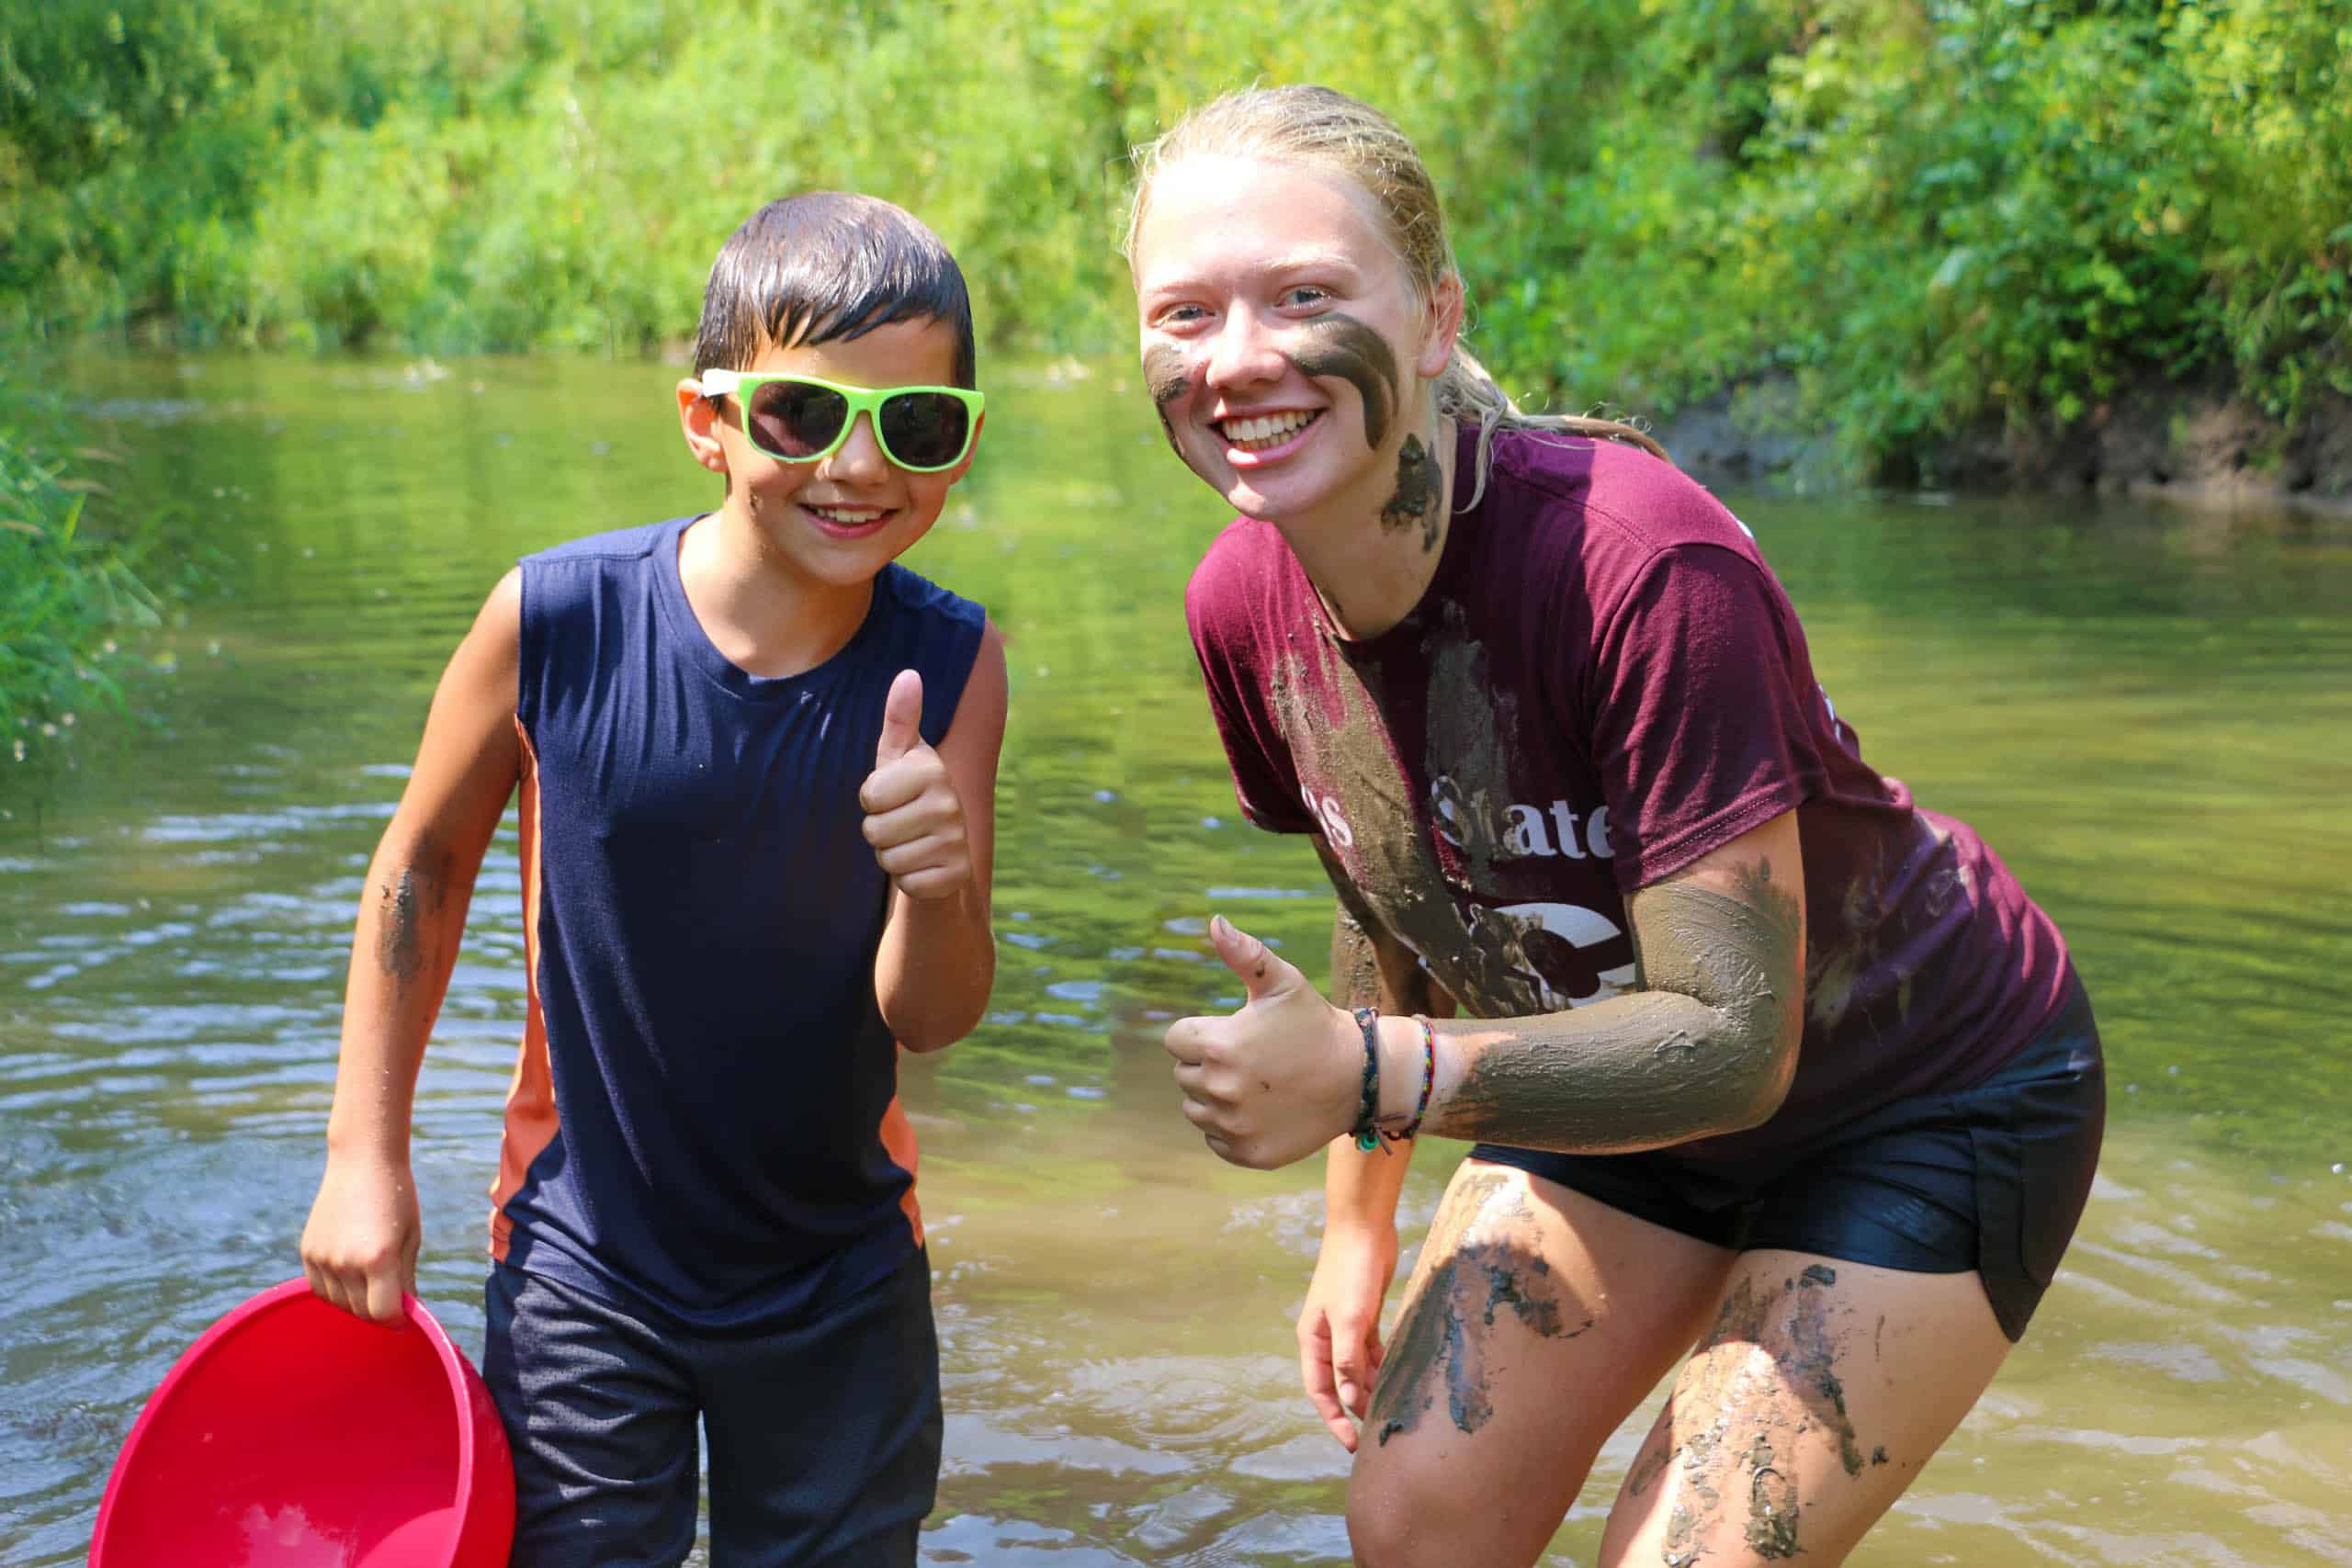 A woman and a boy participating in a summer camp activity in Iowa, with mud on their faces.